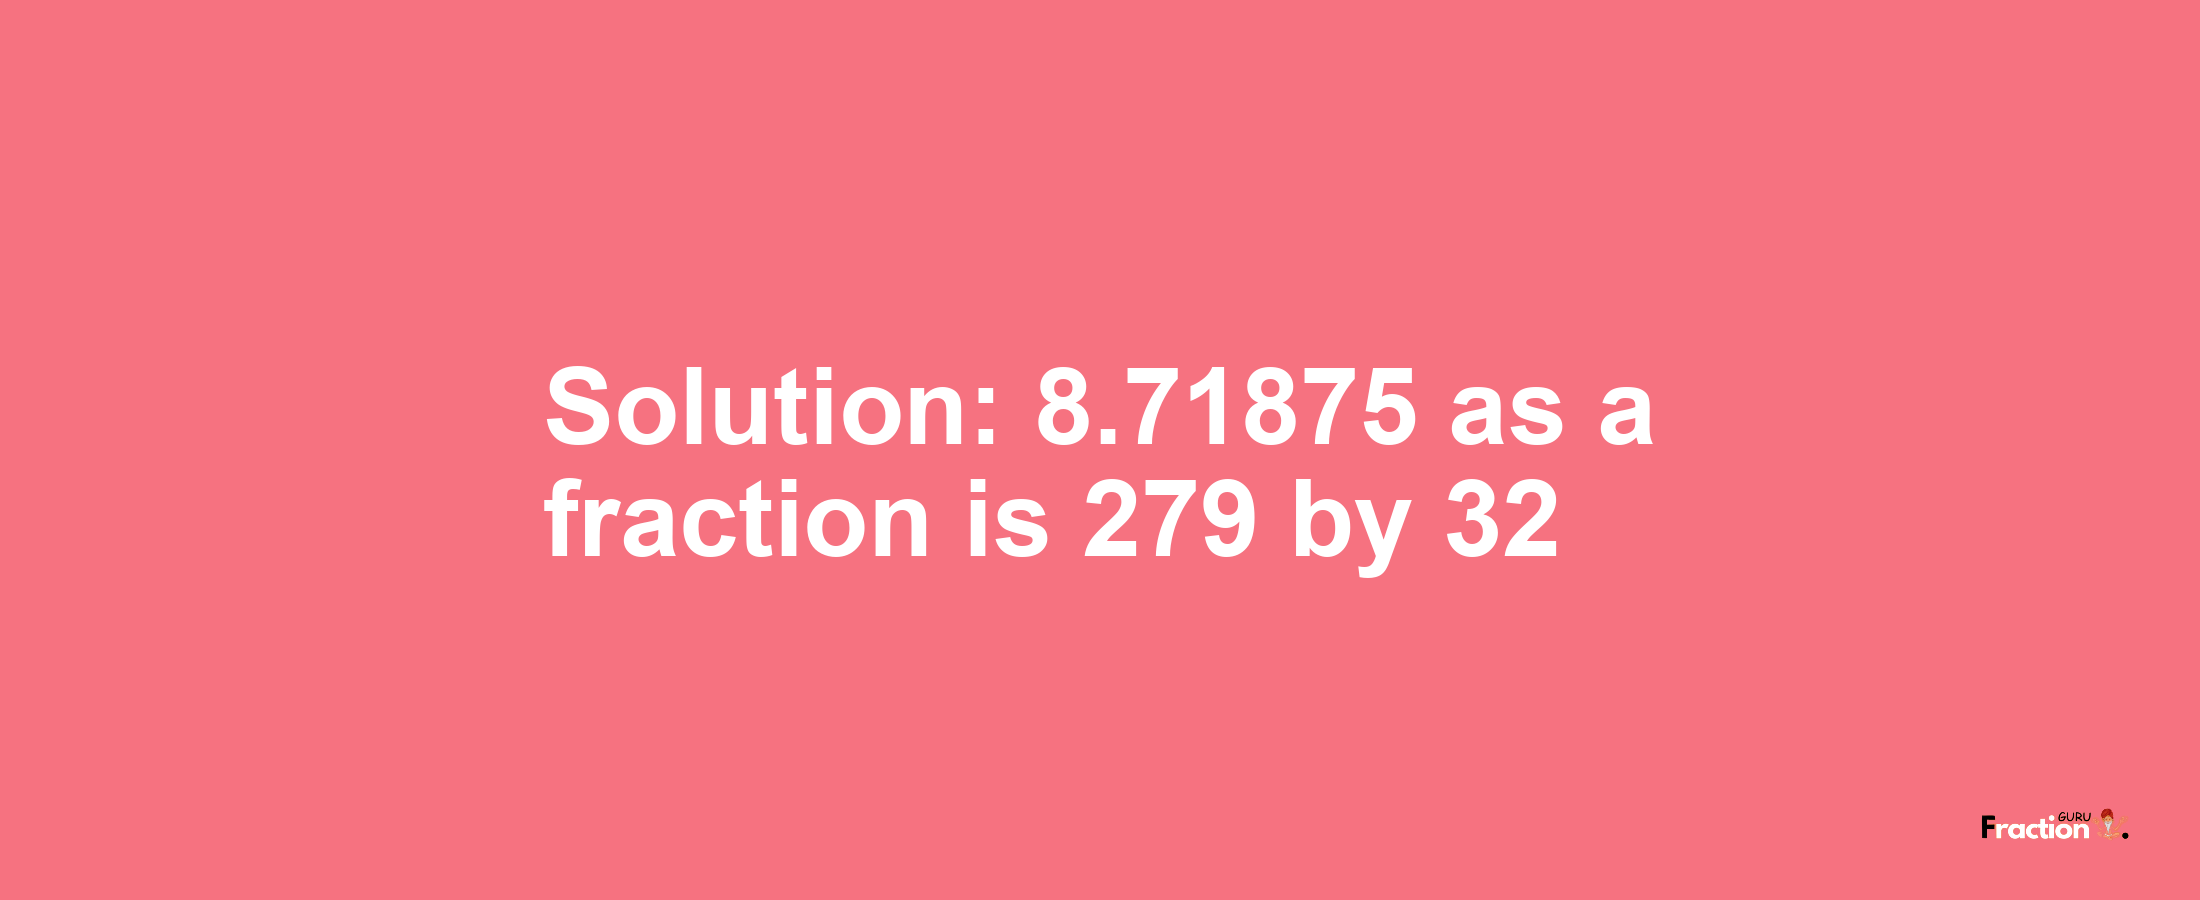 Solution:8.71875 as a fraction is 279/32